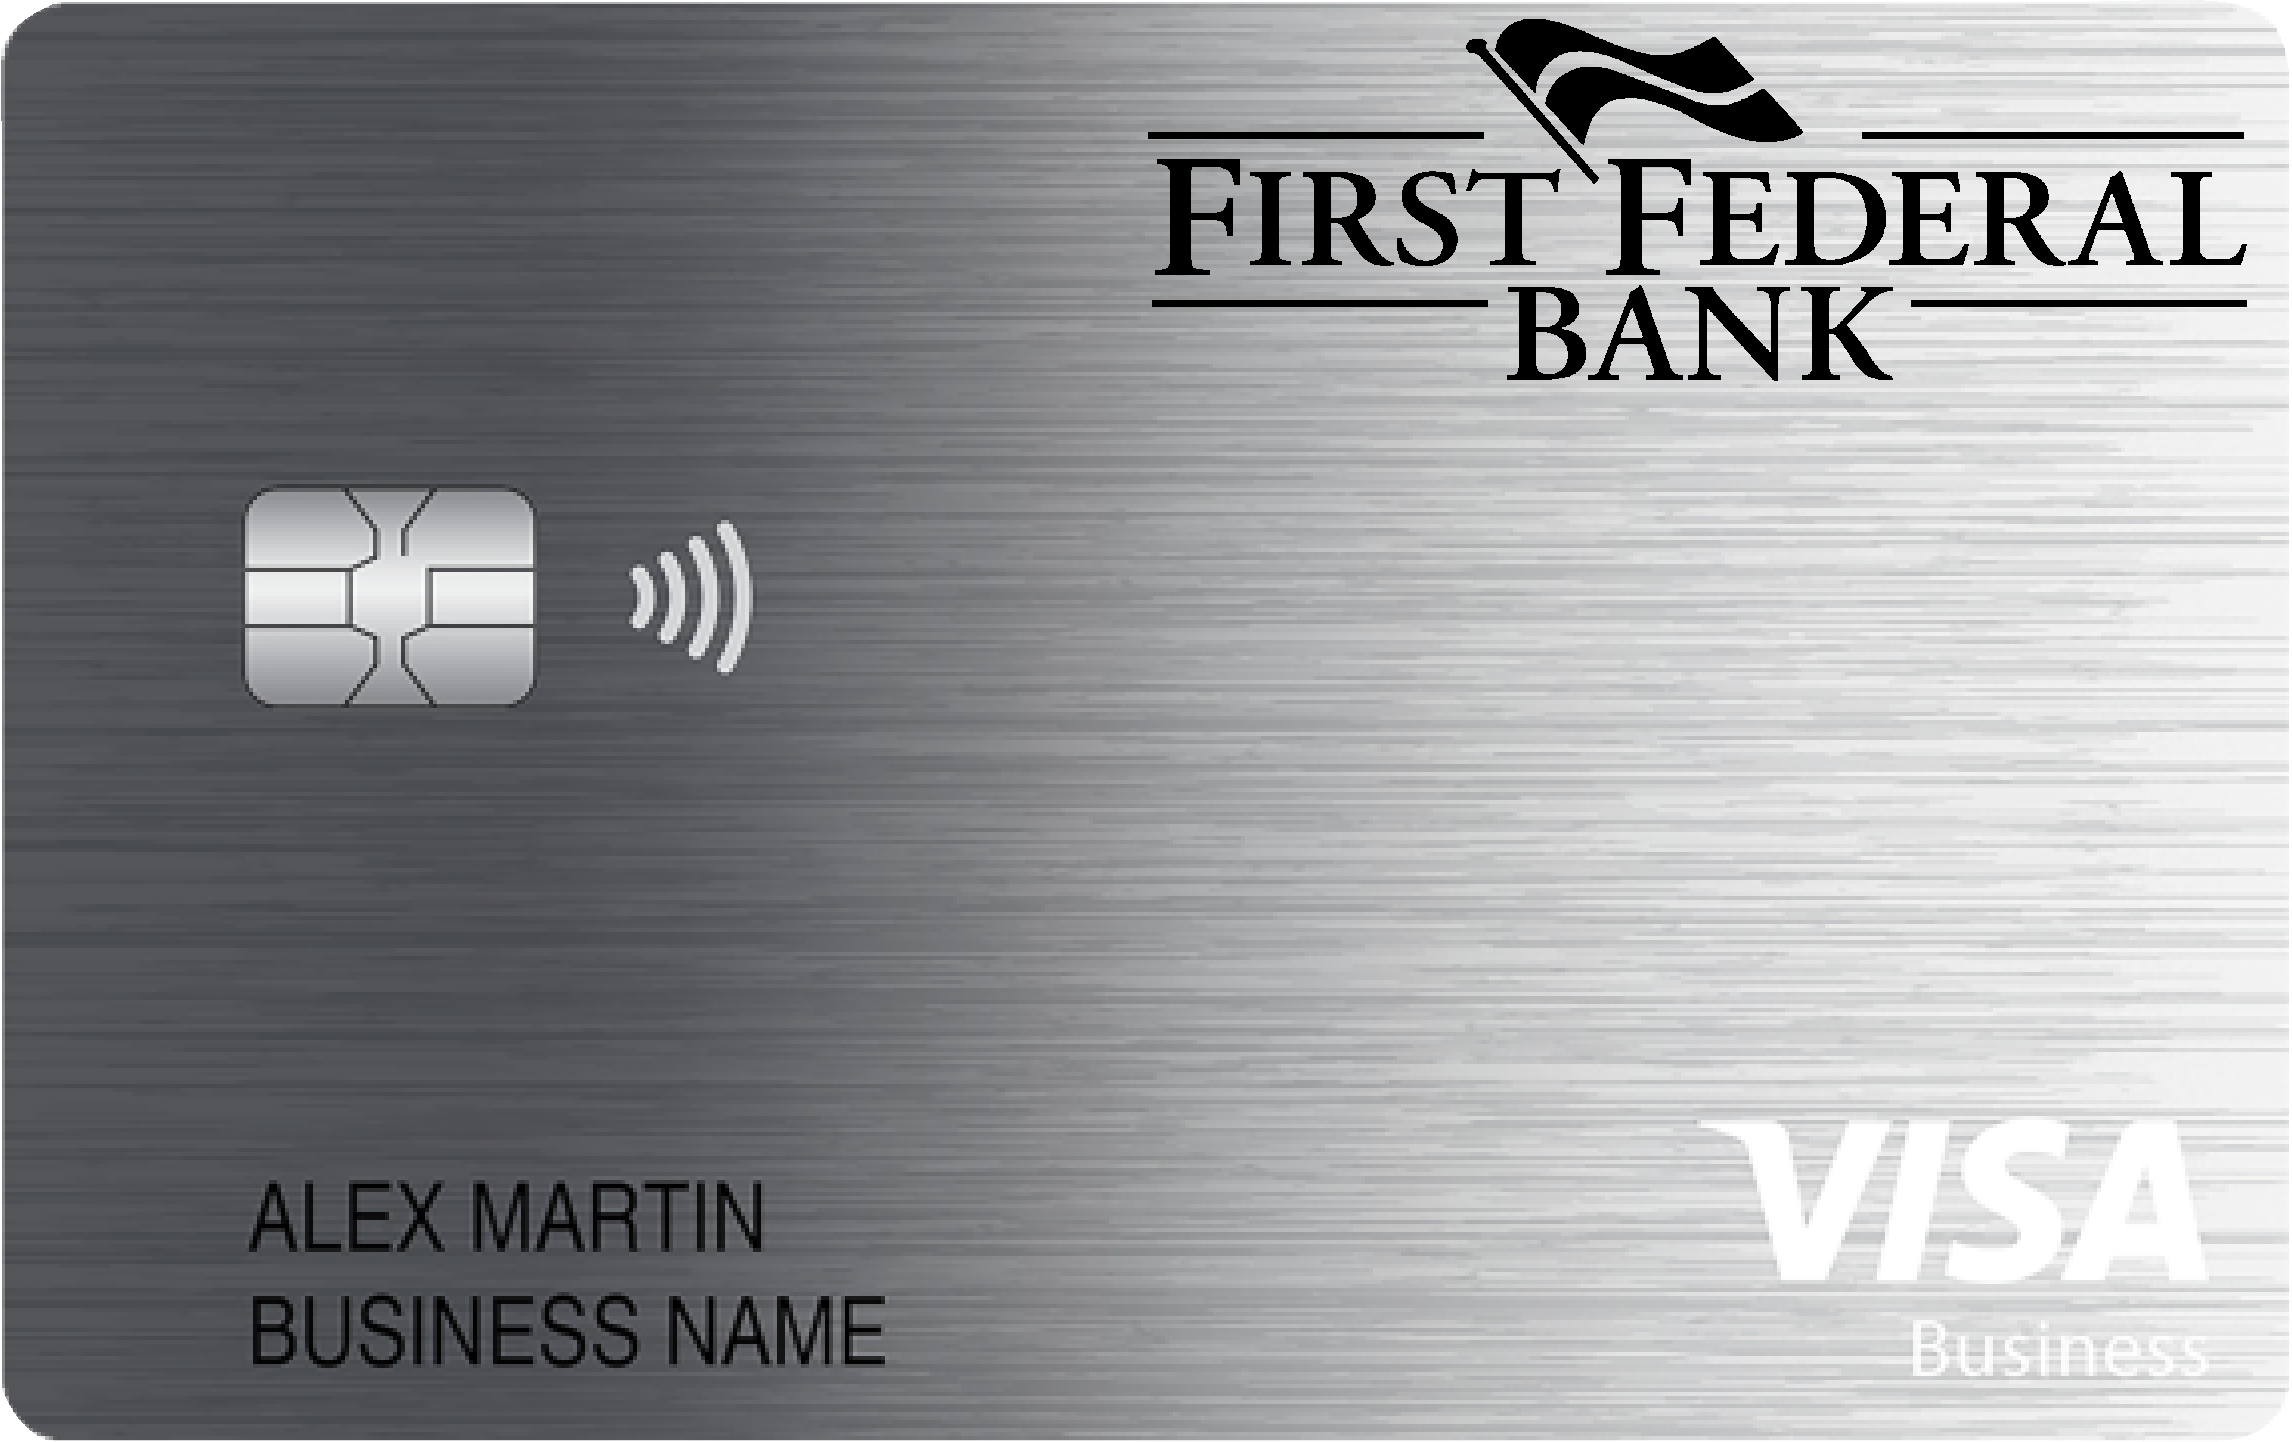 First Federal Bank of Wisconsin Business Card Card